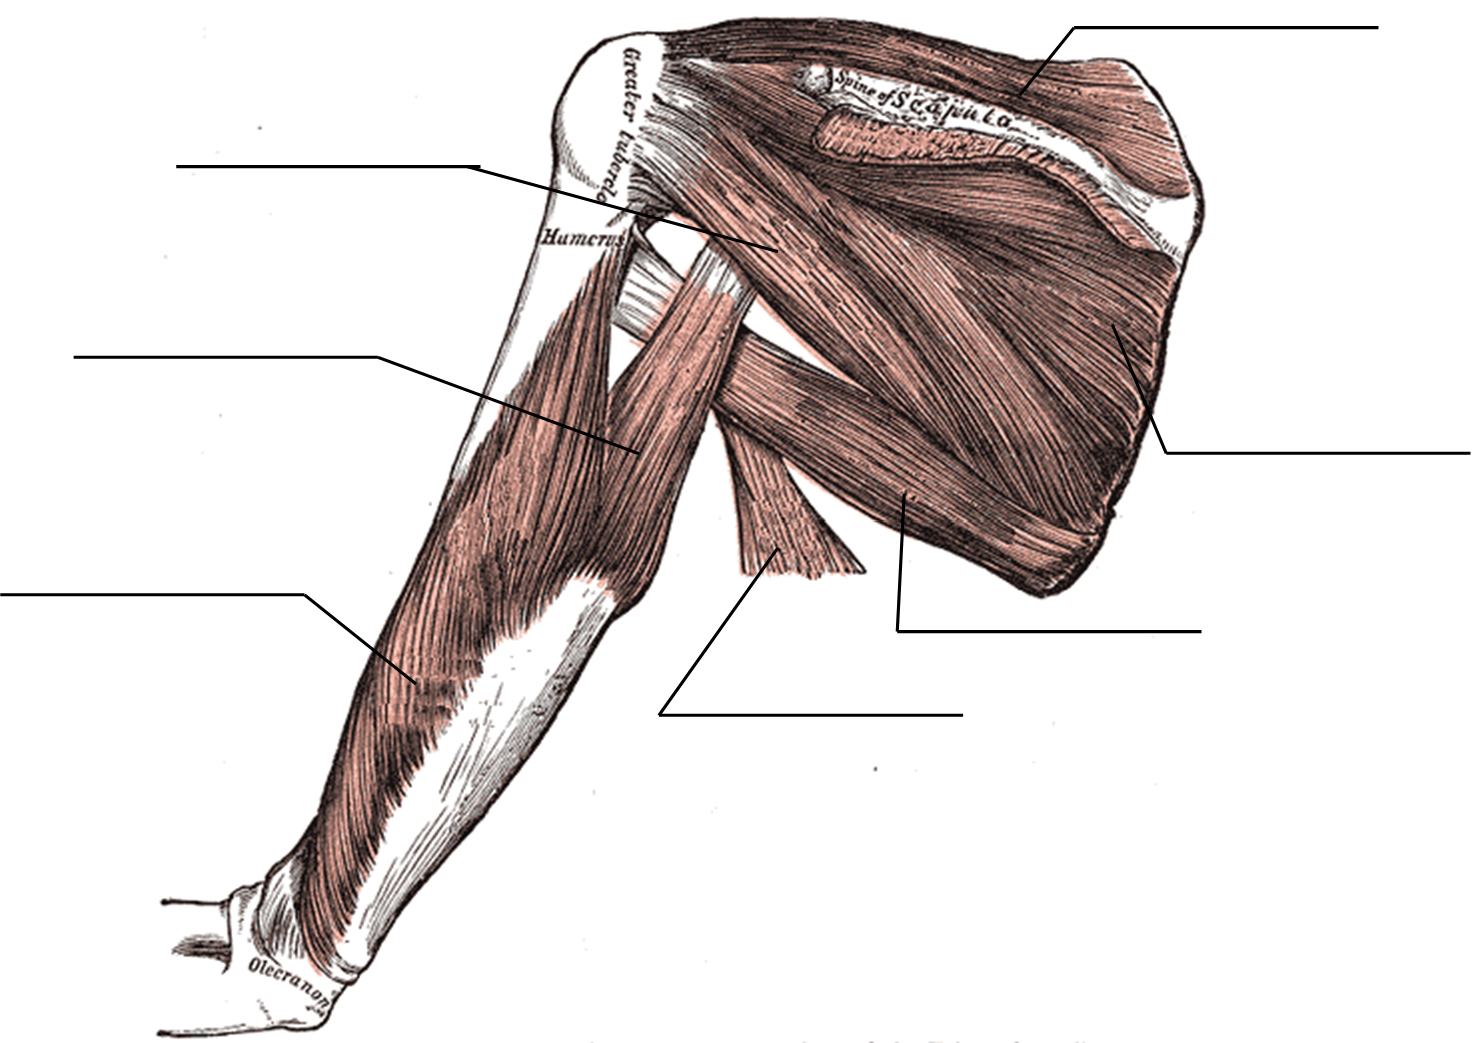 Rotator cuff muscles figure for labeling